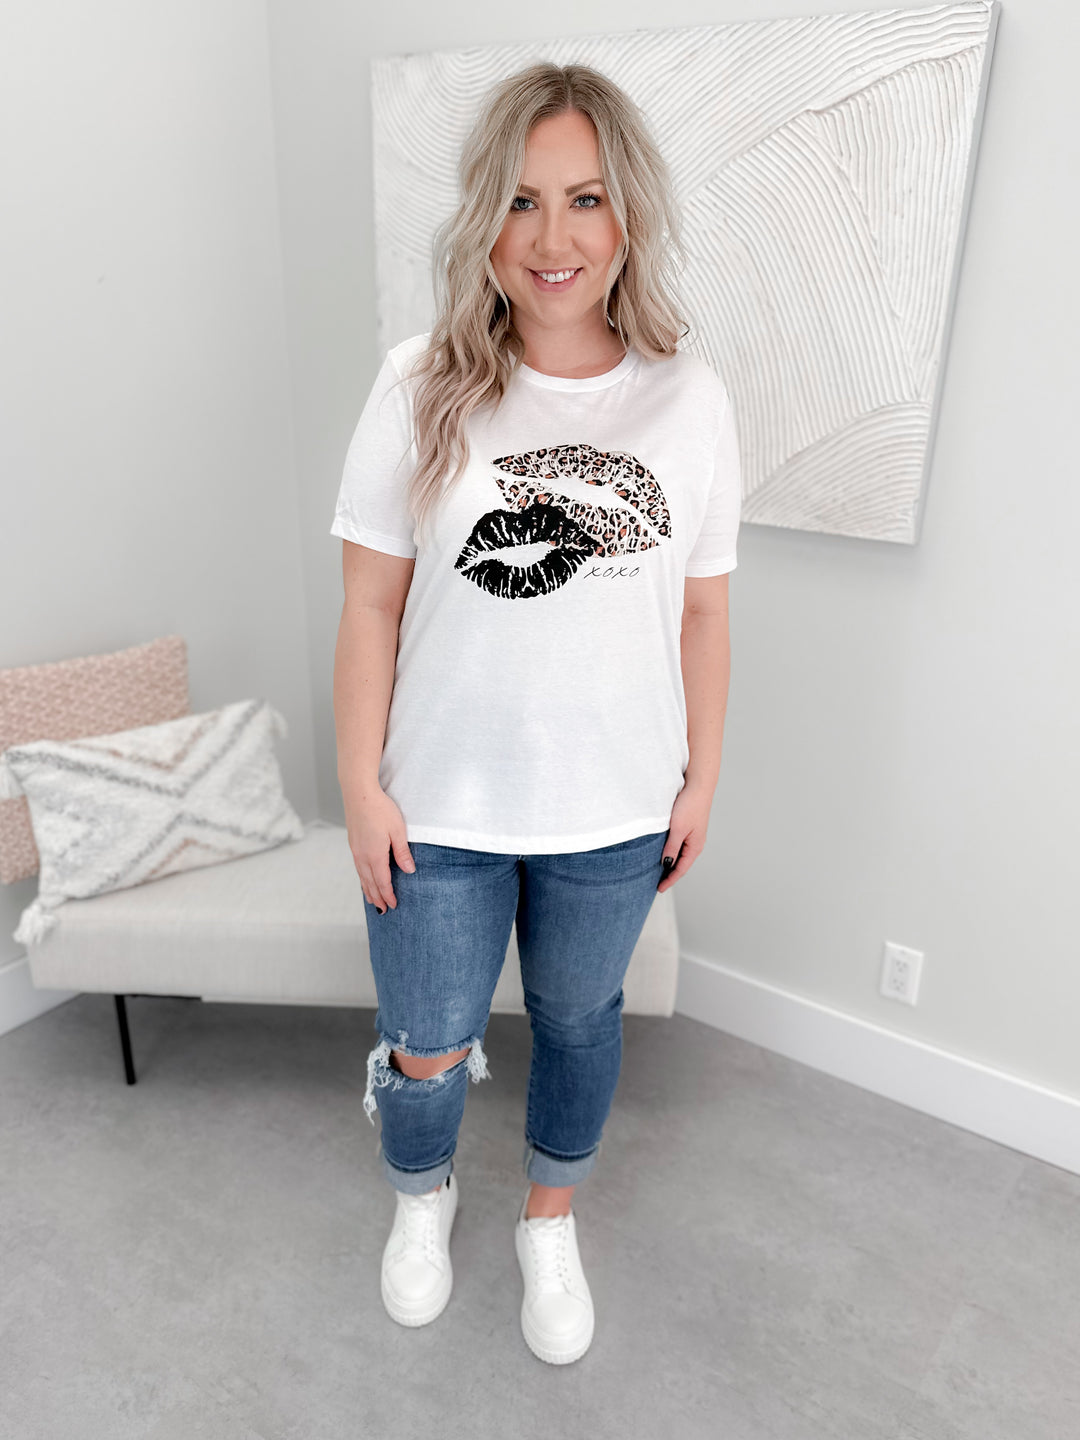 XOXO Tee in White by Ash + Antler